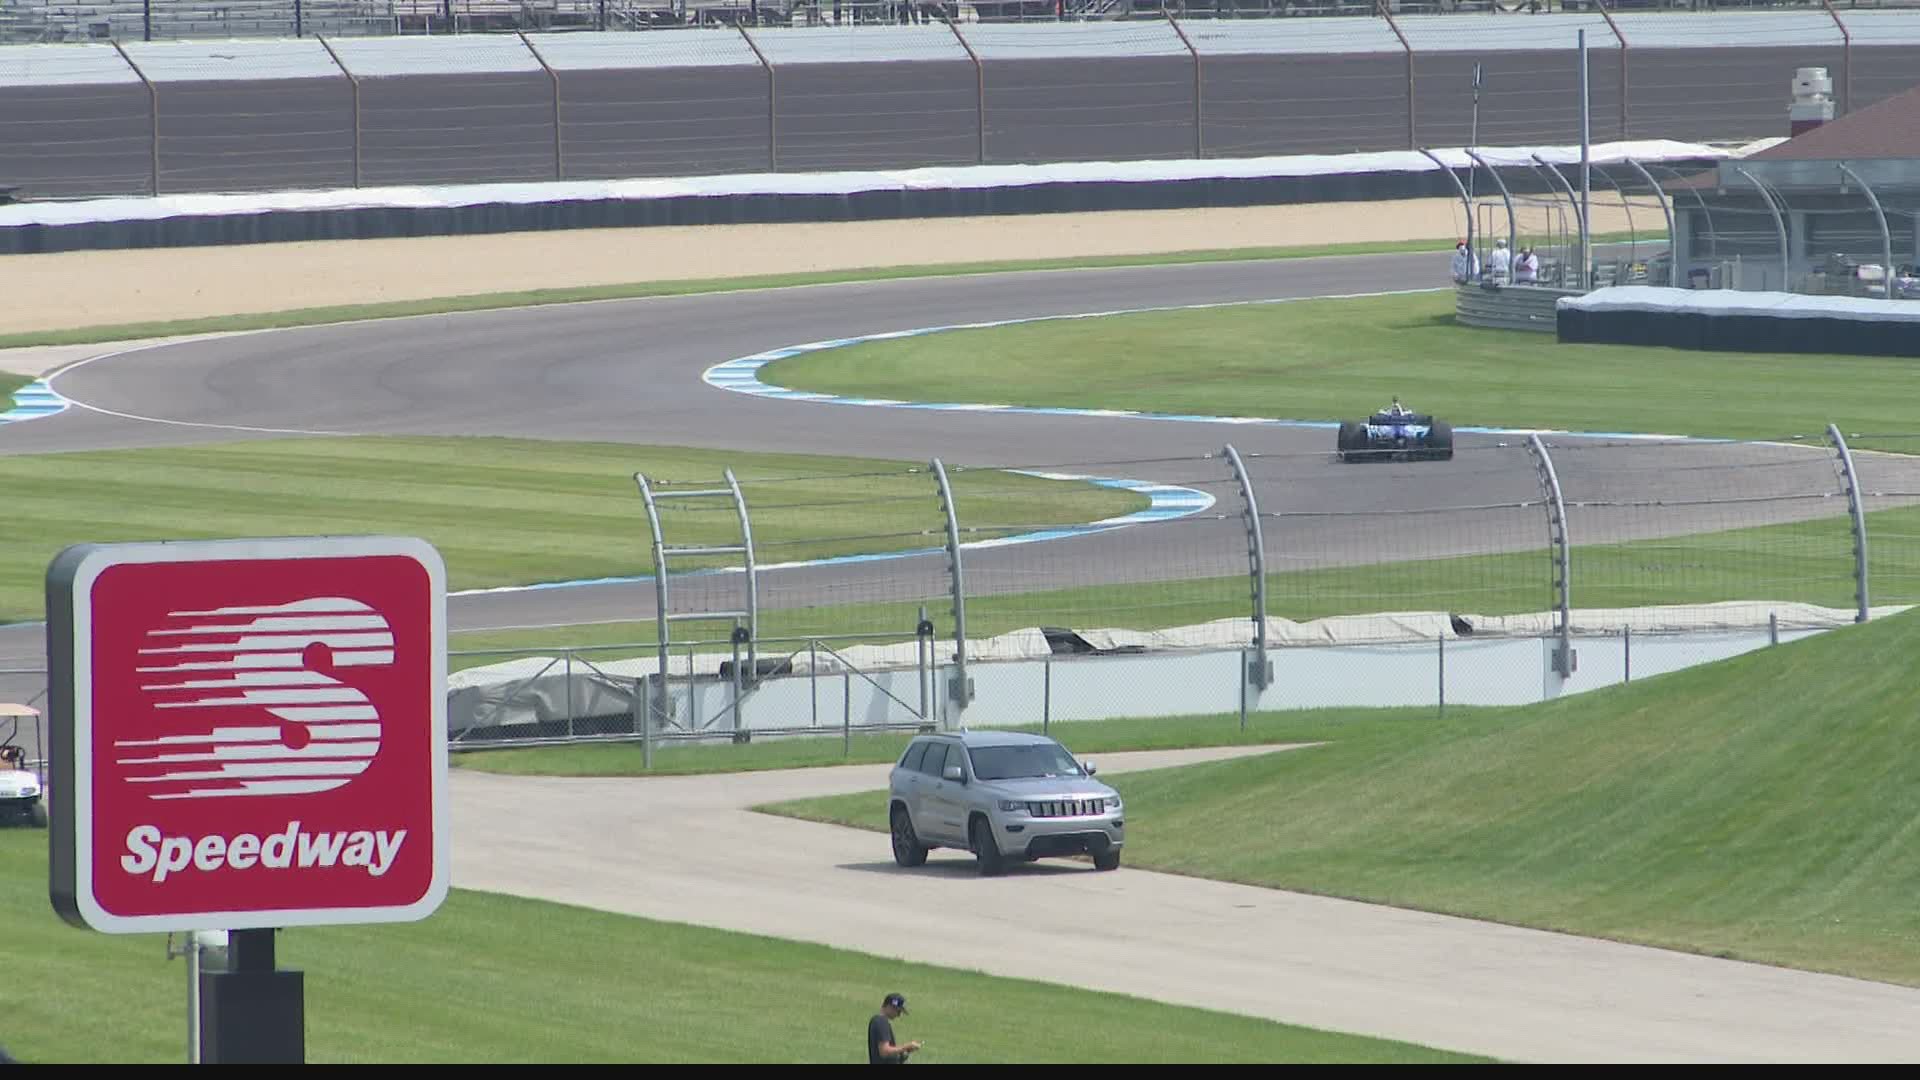 INDYCAR and NASCAR took to the track Friday to practice for this weekend's races at IMS, but there were no fans in attendance.